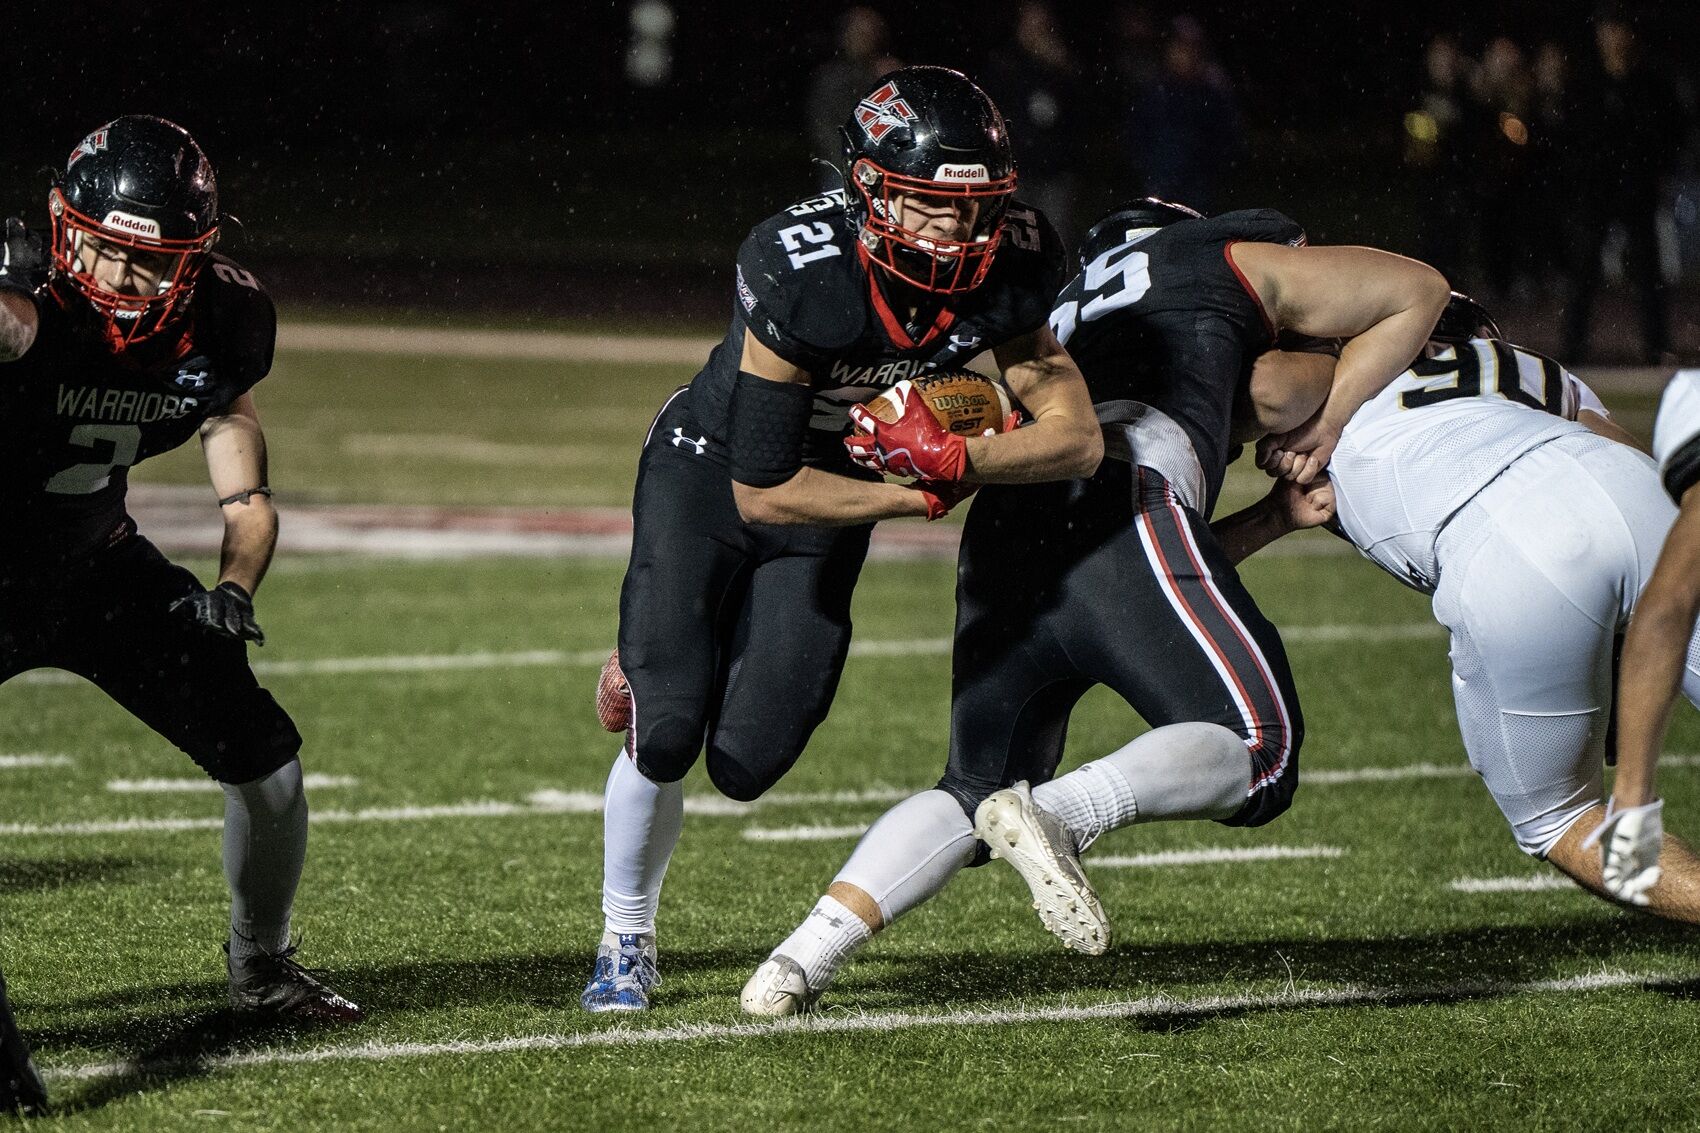 Franklin Defeats Muskego in WIAA Division 1 Level 3 Playoff: Shelton’s 194-yard Touchdown Performance Leads Sabers to Victory